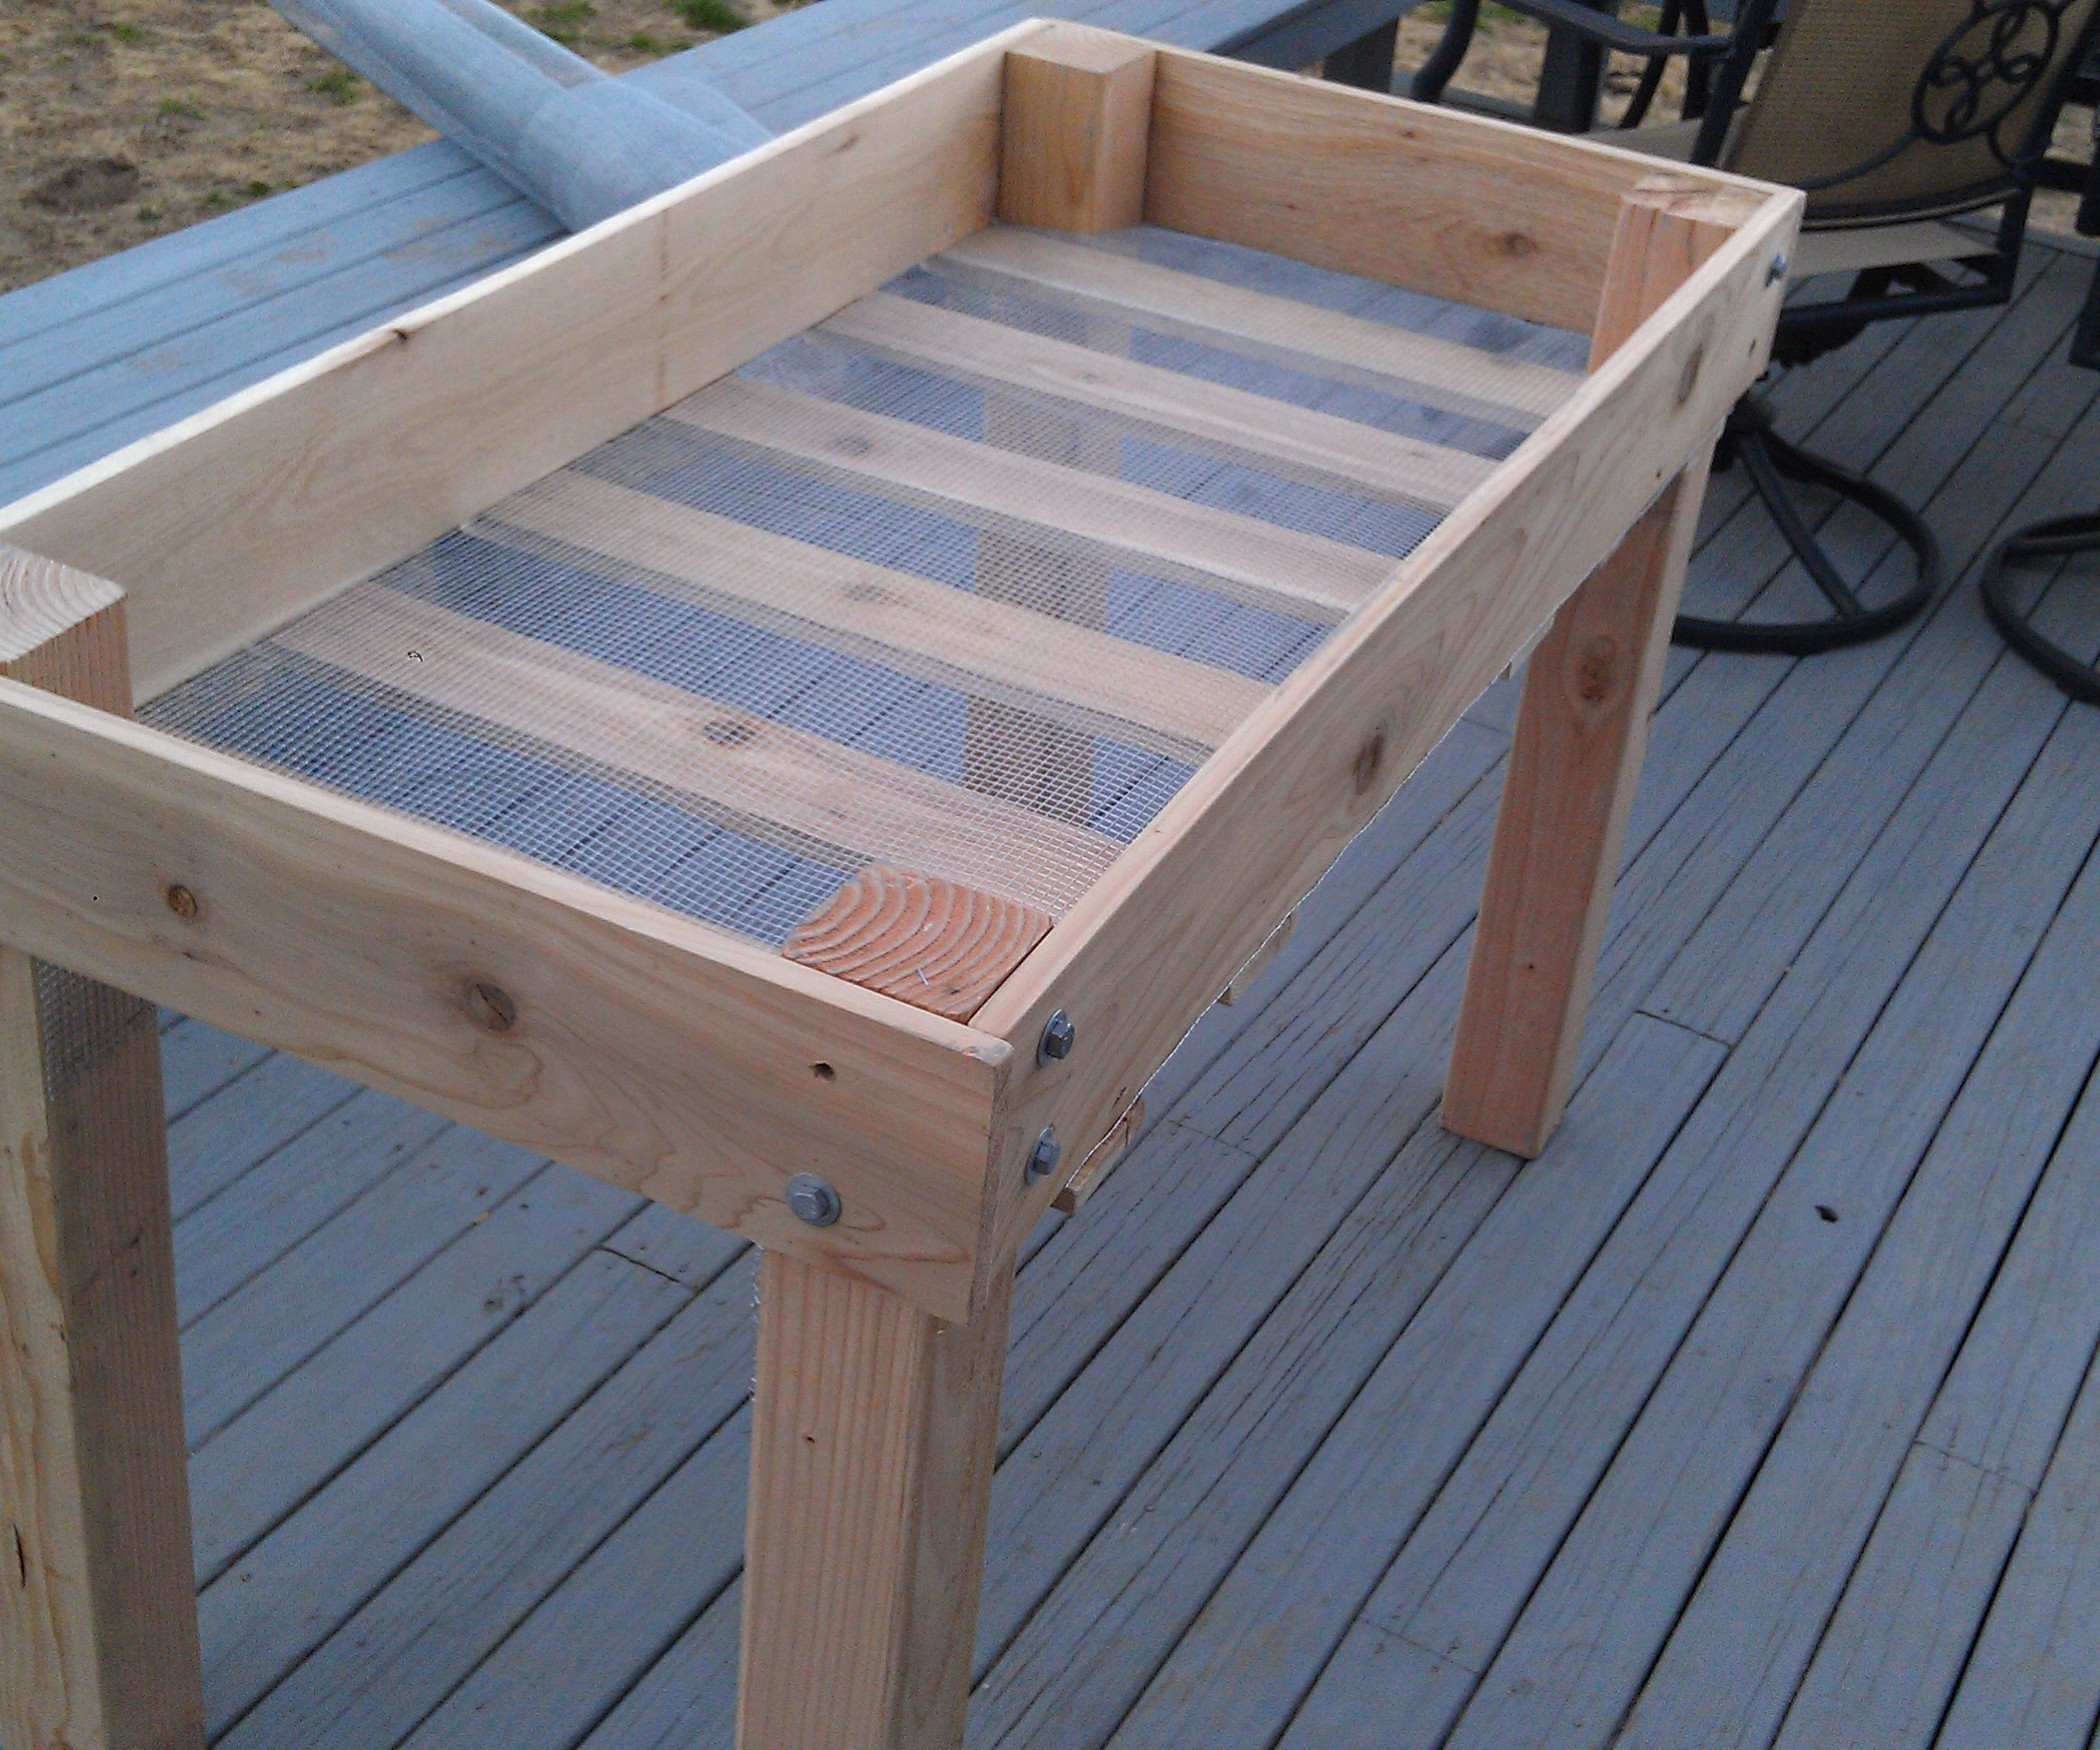 DIY Plans For Raised Beds
 DIY Raised Bed Planter 16 Steps with